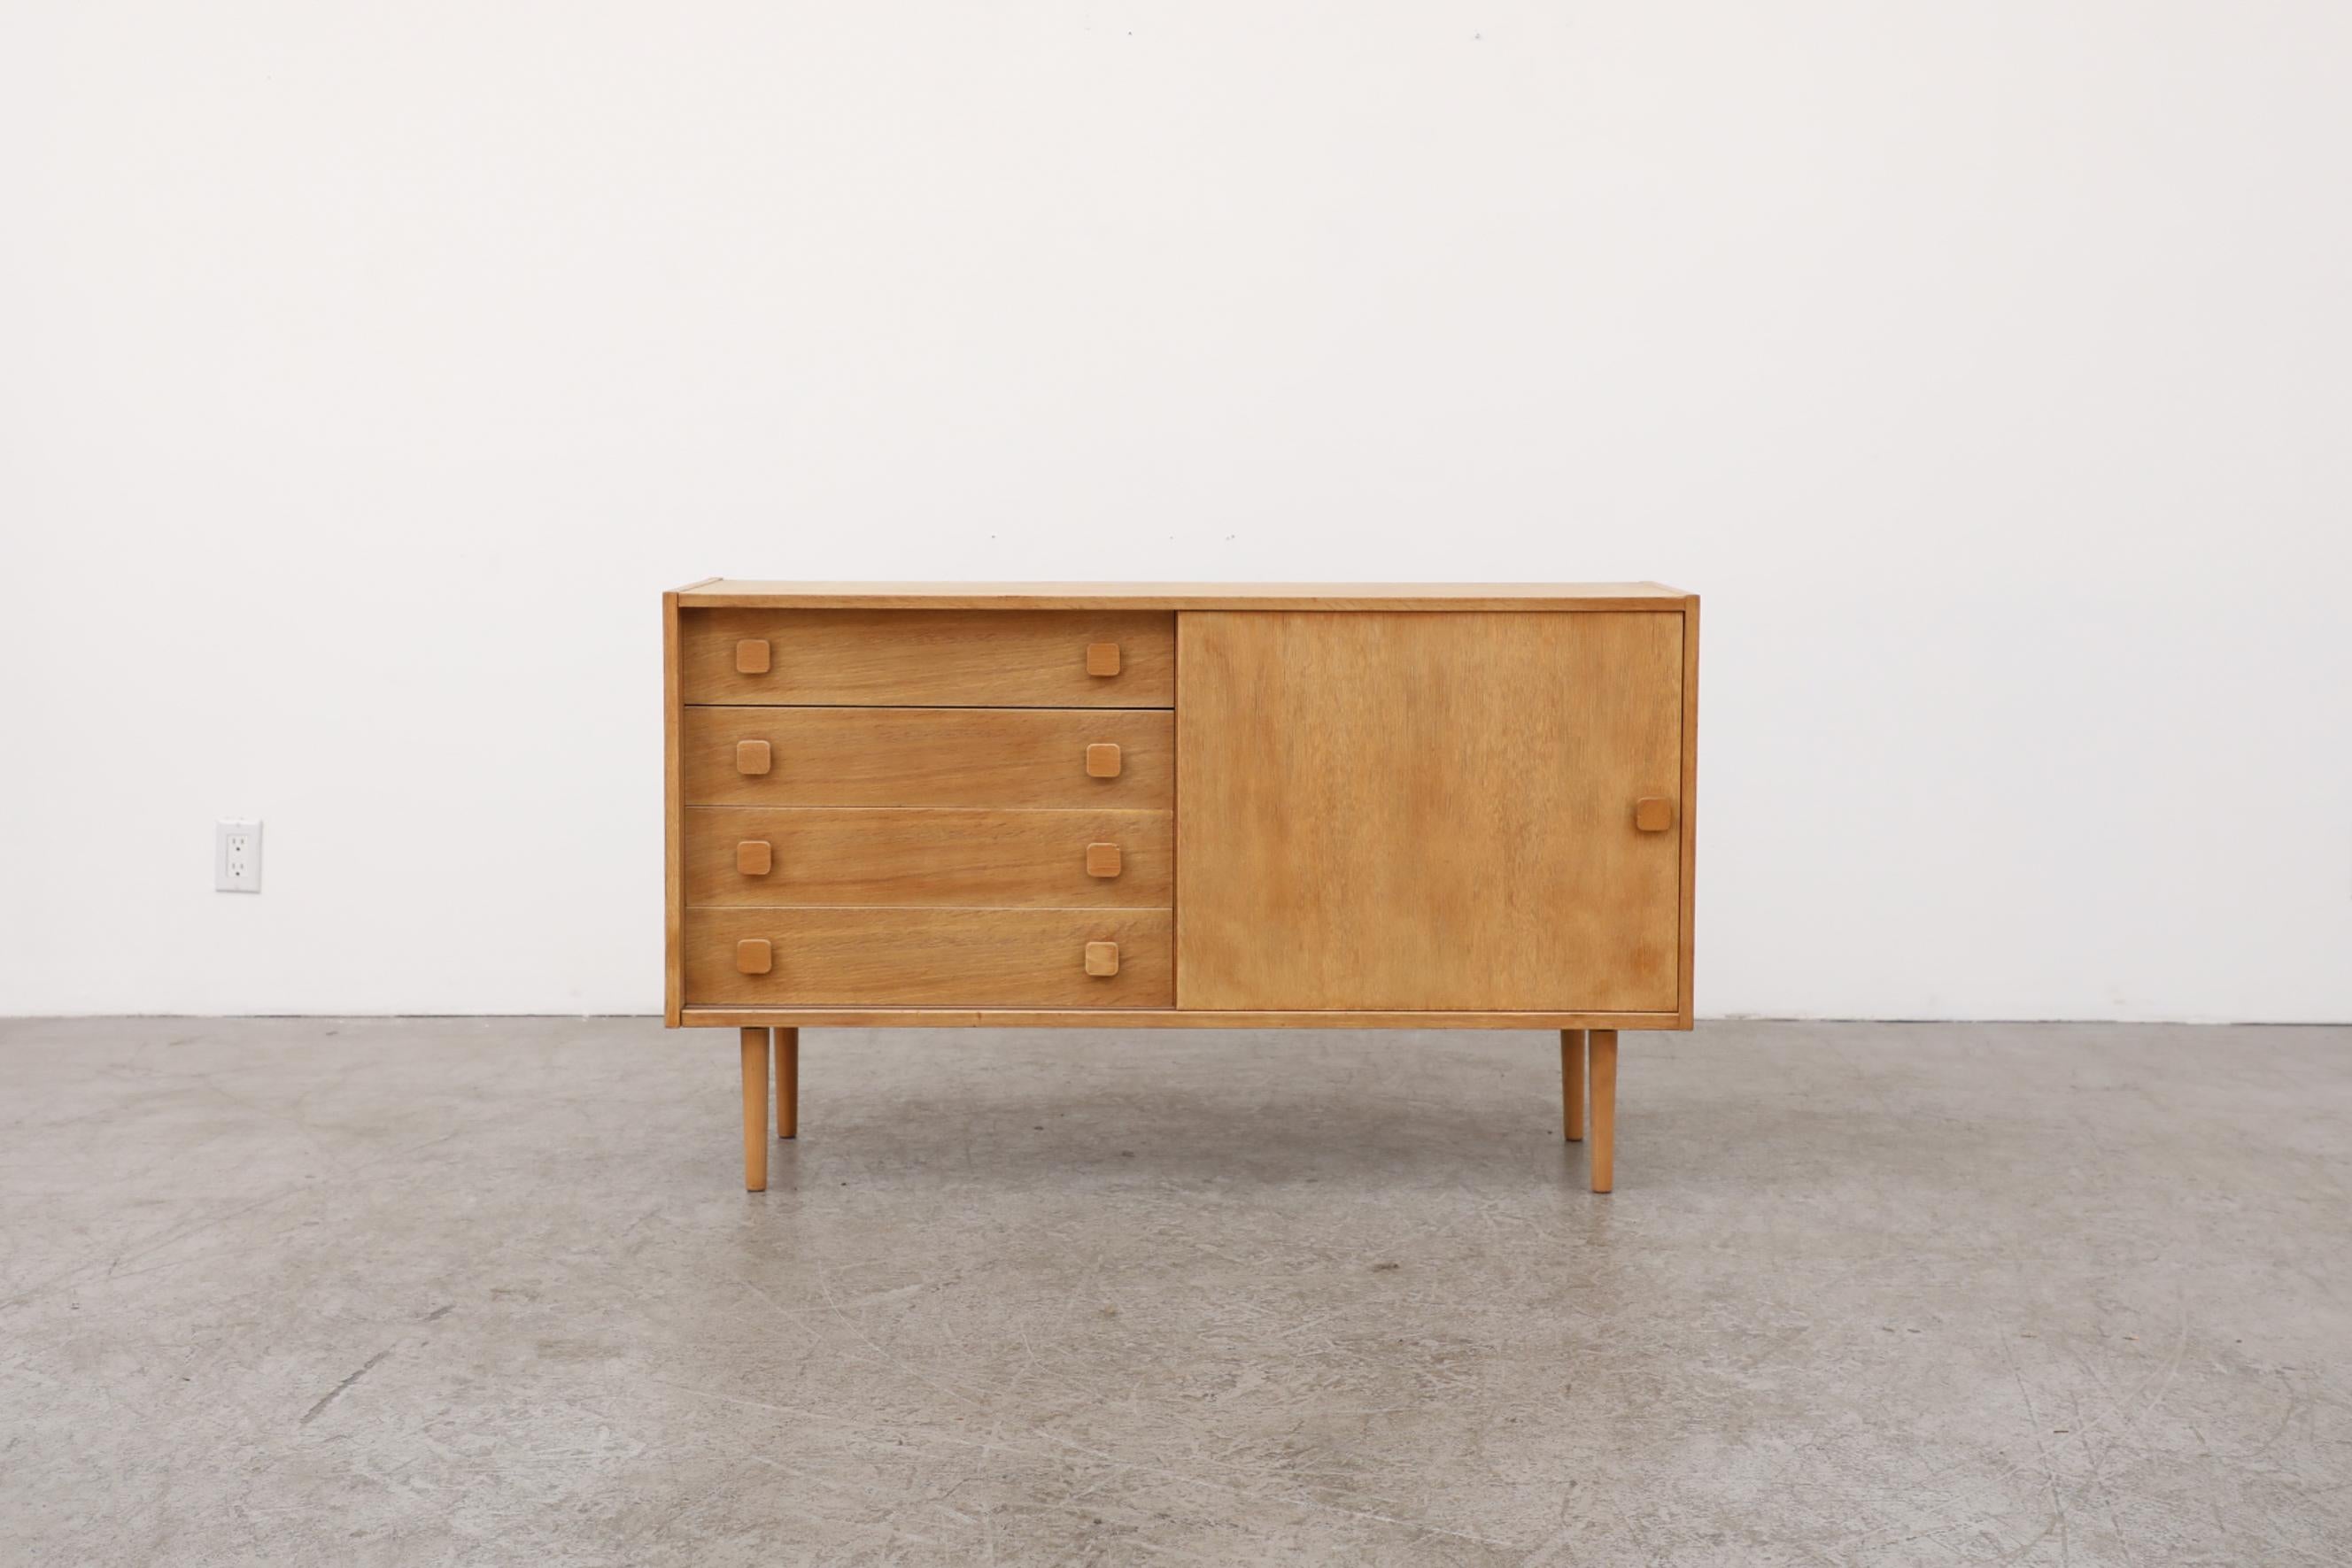 1970's Domino Mobler Danish oak sideboard or credenza with one sliding door and four drawers. Great example of Scandinavian design. This pieces has been sanded down for an unfinished light oak tone, it's in otherwise original condition with visible